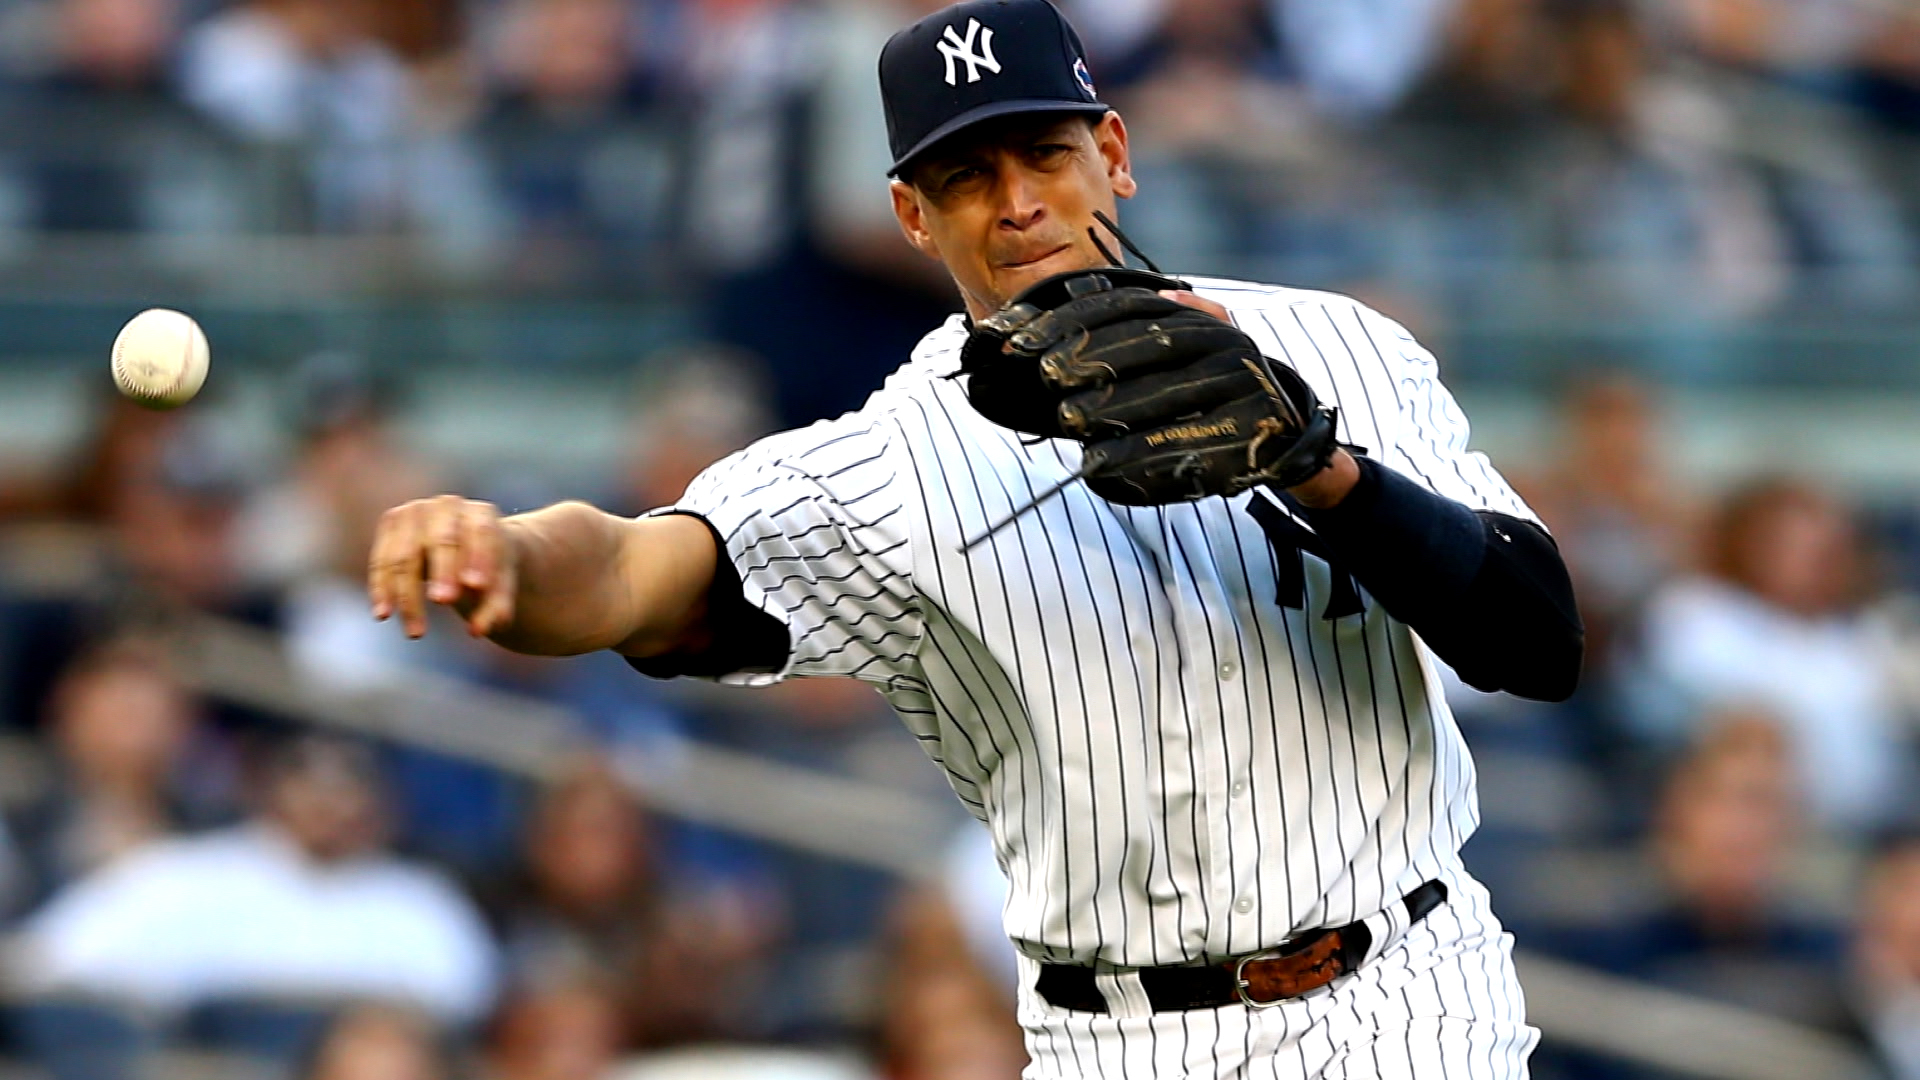 Lupica on A-Rod: 'Everything he's done, he did to himself' - TODAY.com